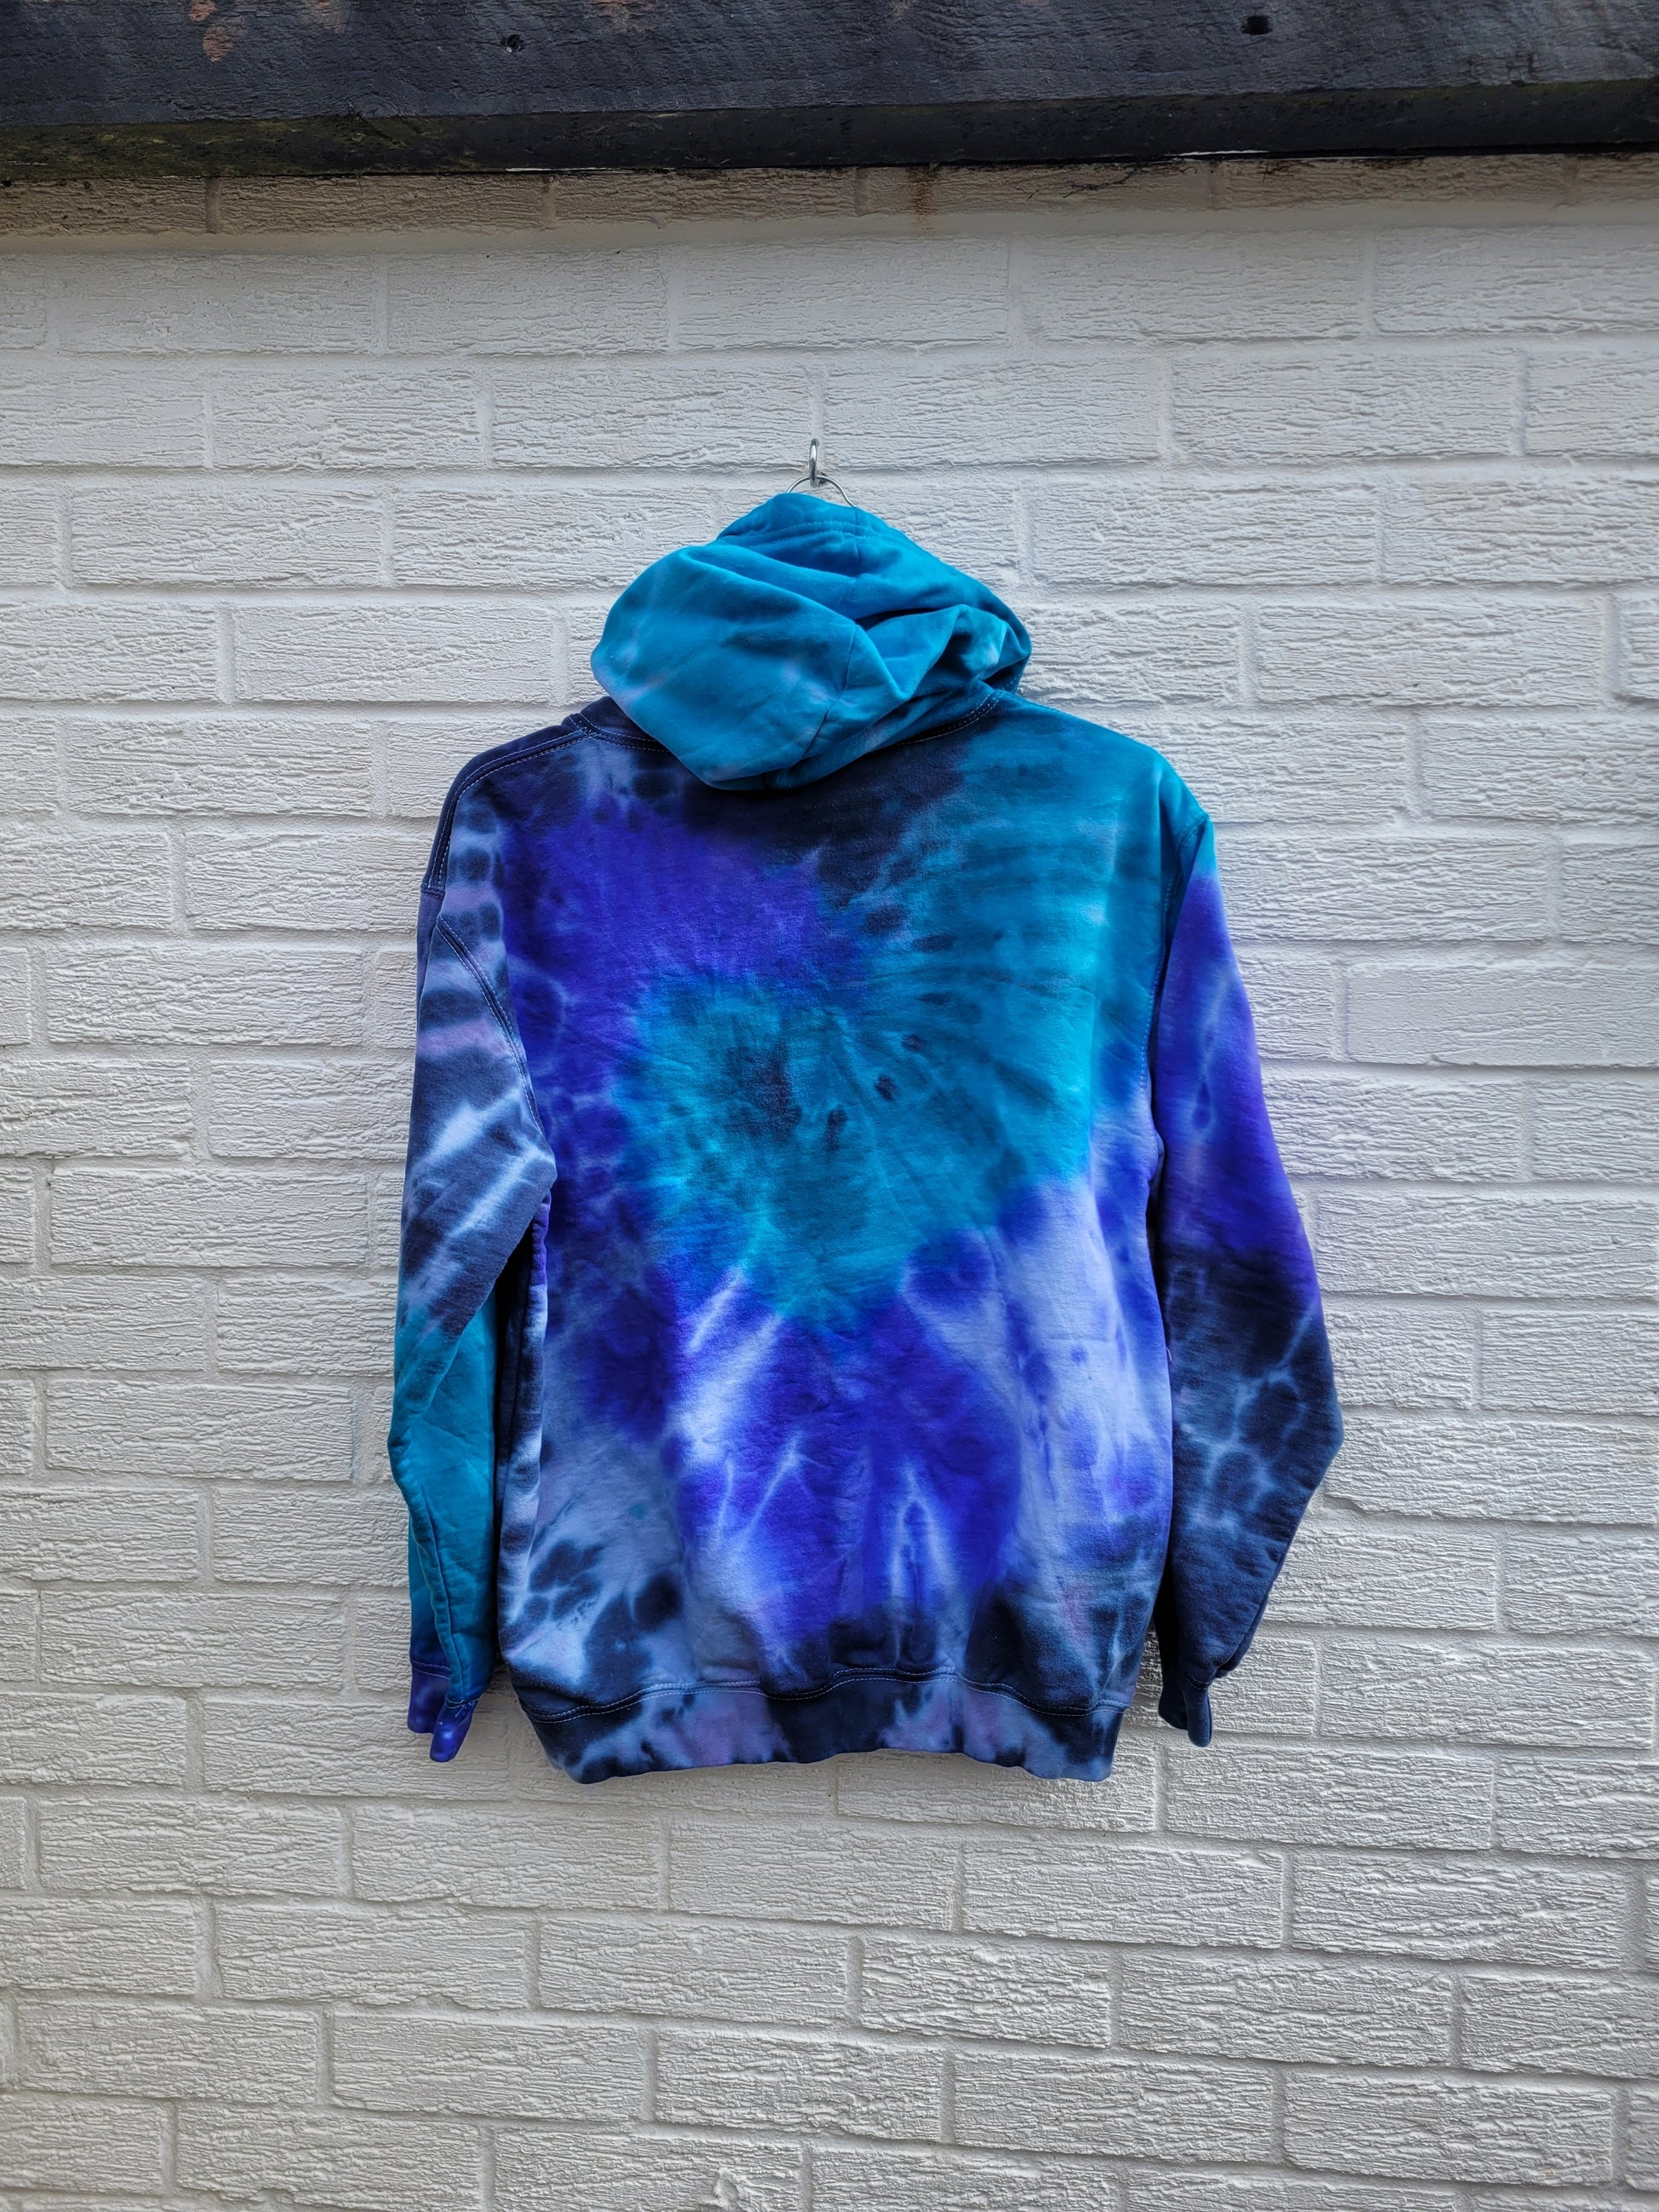 Organic cotton tie dye hoodie, in aqua, blue and navy shades, the perfect cosy cover up for the coming summer evenings.

These one of a kind hoodies are hand dyed to order, in 80% Organic Cotton, 20% Recycled Polyester, double fabric hood, front pouch pocket, ribbed cuffs and hem

